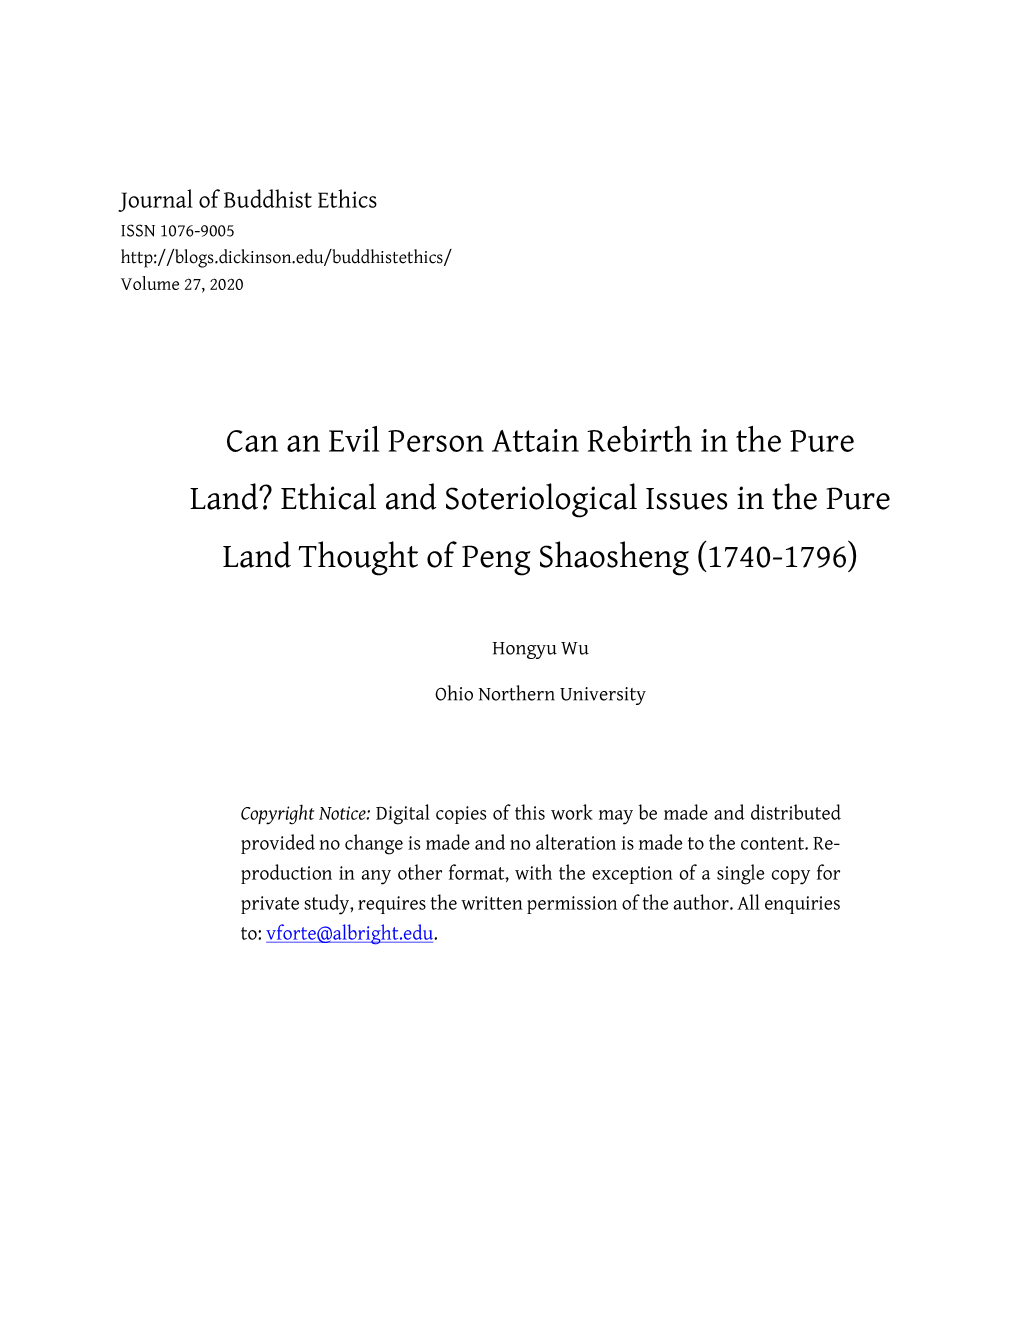 Ethical and Soteriological Issues in the Pure Land Thought of Peng Shaosheng (1740-1796)